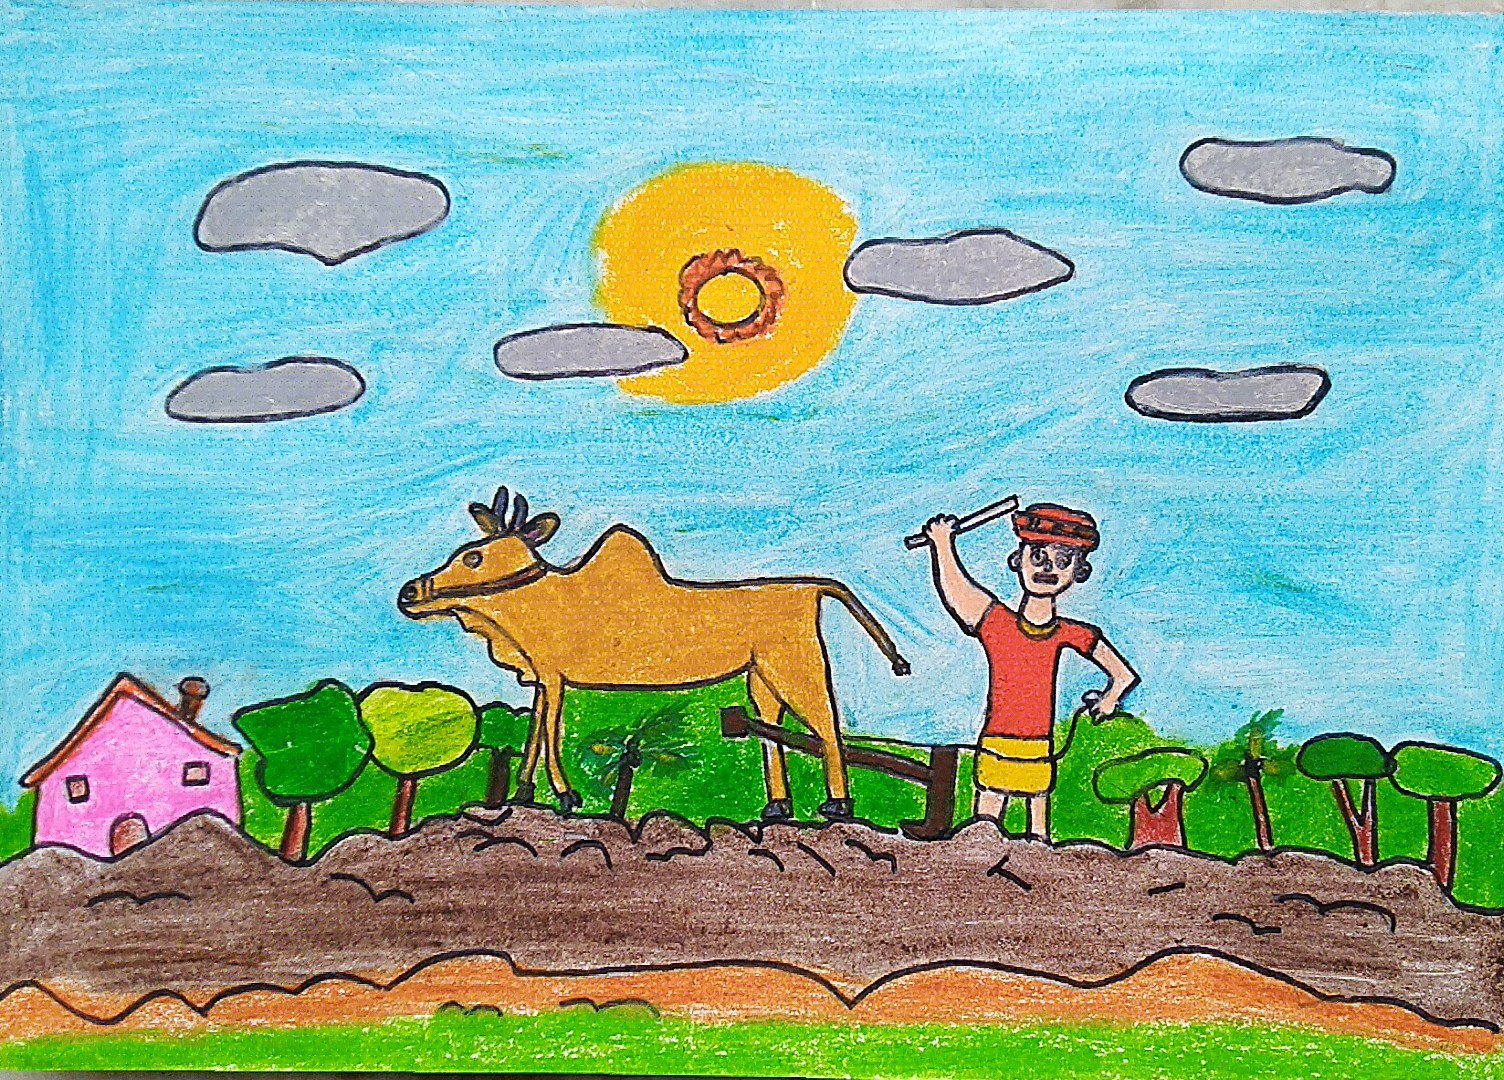 FARMER THE REAL HERO OF AGRICULTURE AND SOCIETY. If there is no farmer to produce food we will be die with hungry. - JOHN ( JOHN ART Gallery 2019).